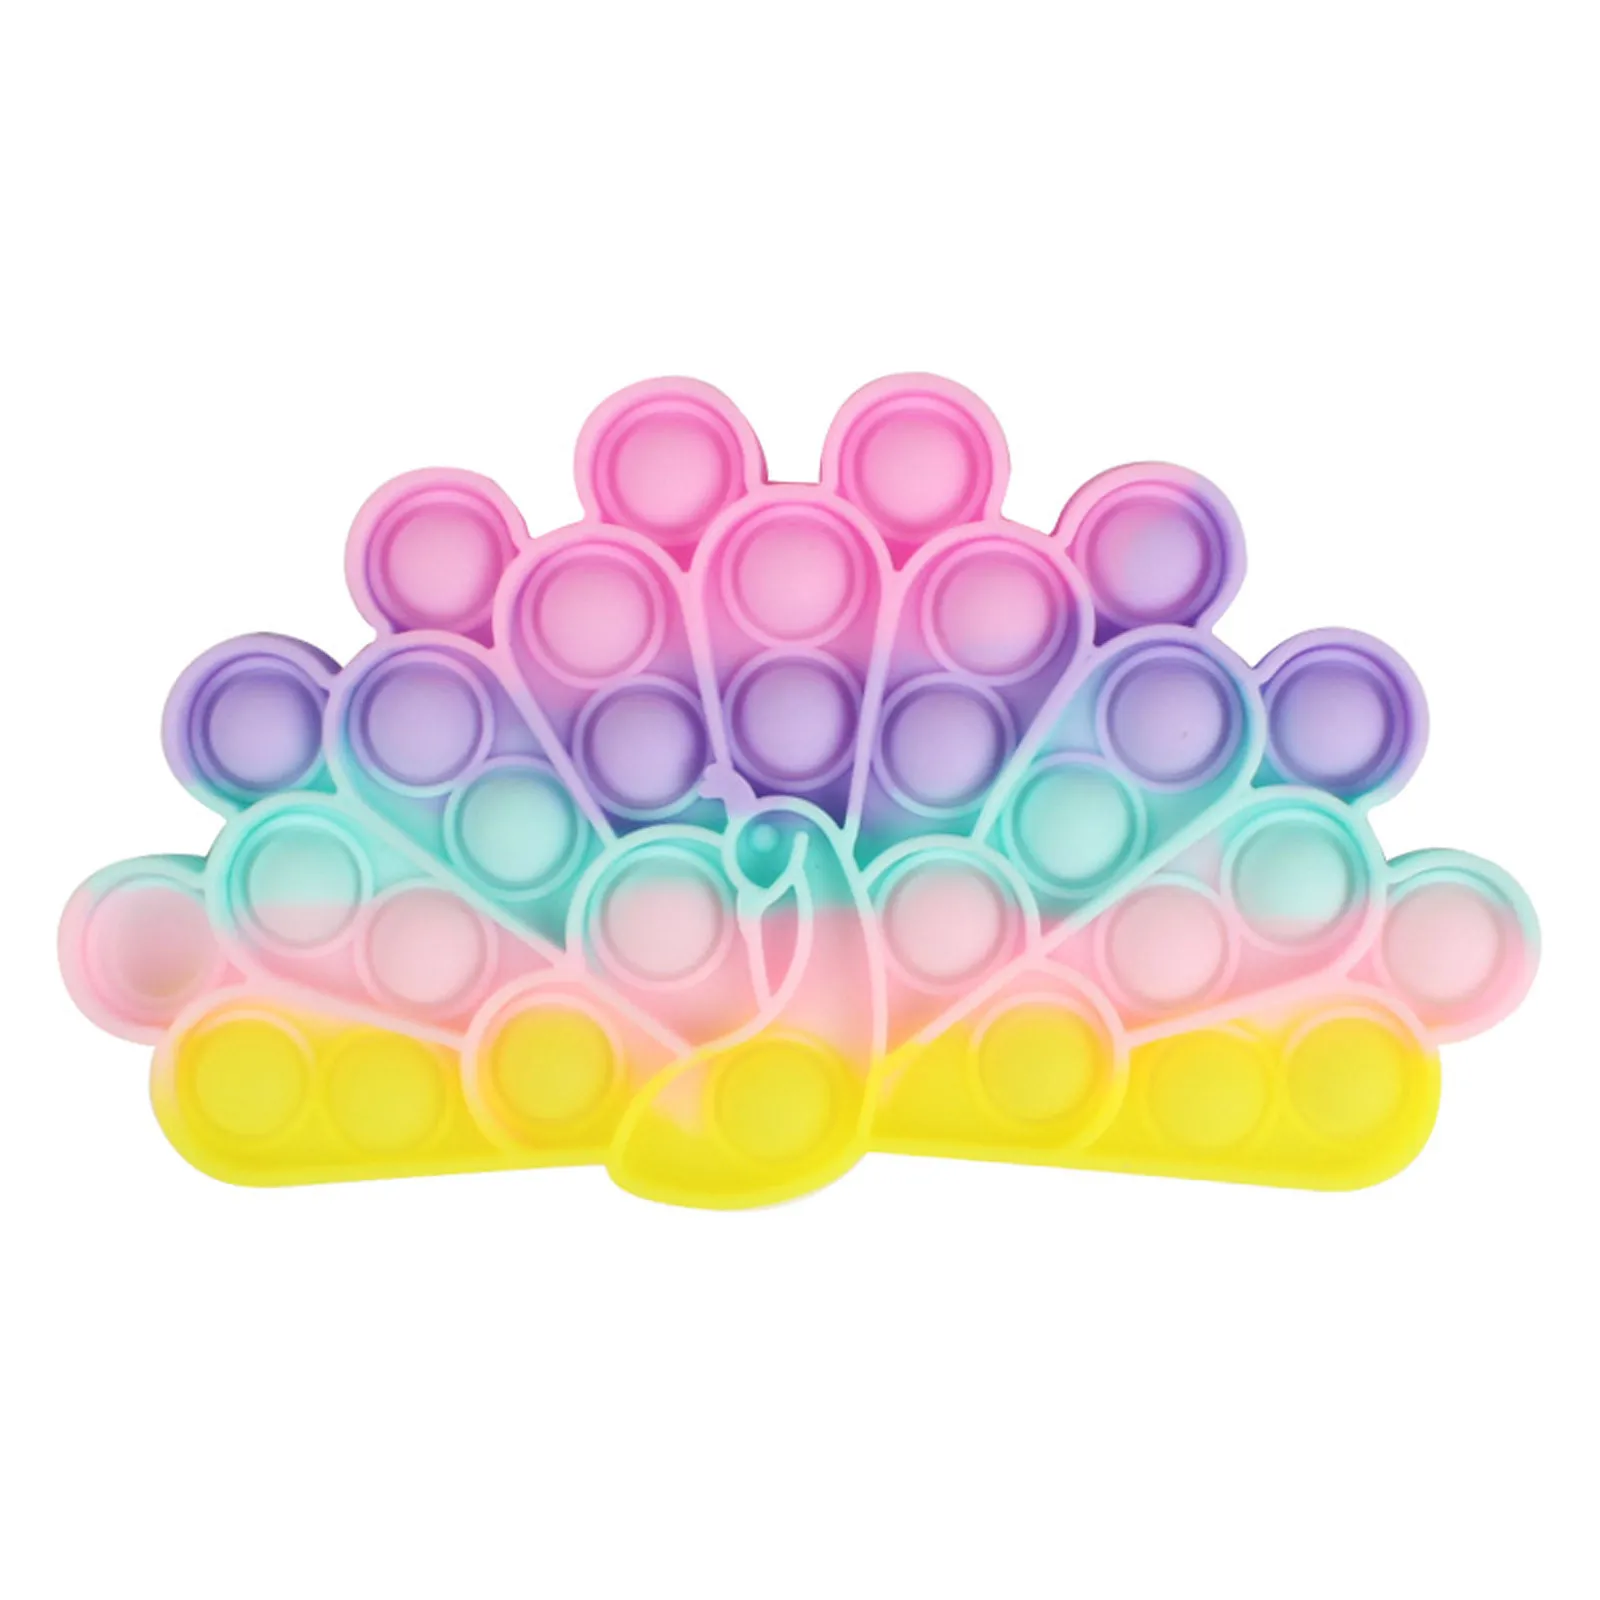 Push Popite Bubble Sensory Fidget Toys Hot New Adult Stress Relief Table Top Anti-stress Its Soft Squeeze Decompression Toys squeeze stress ball